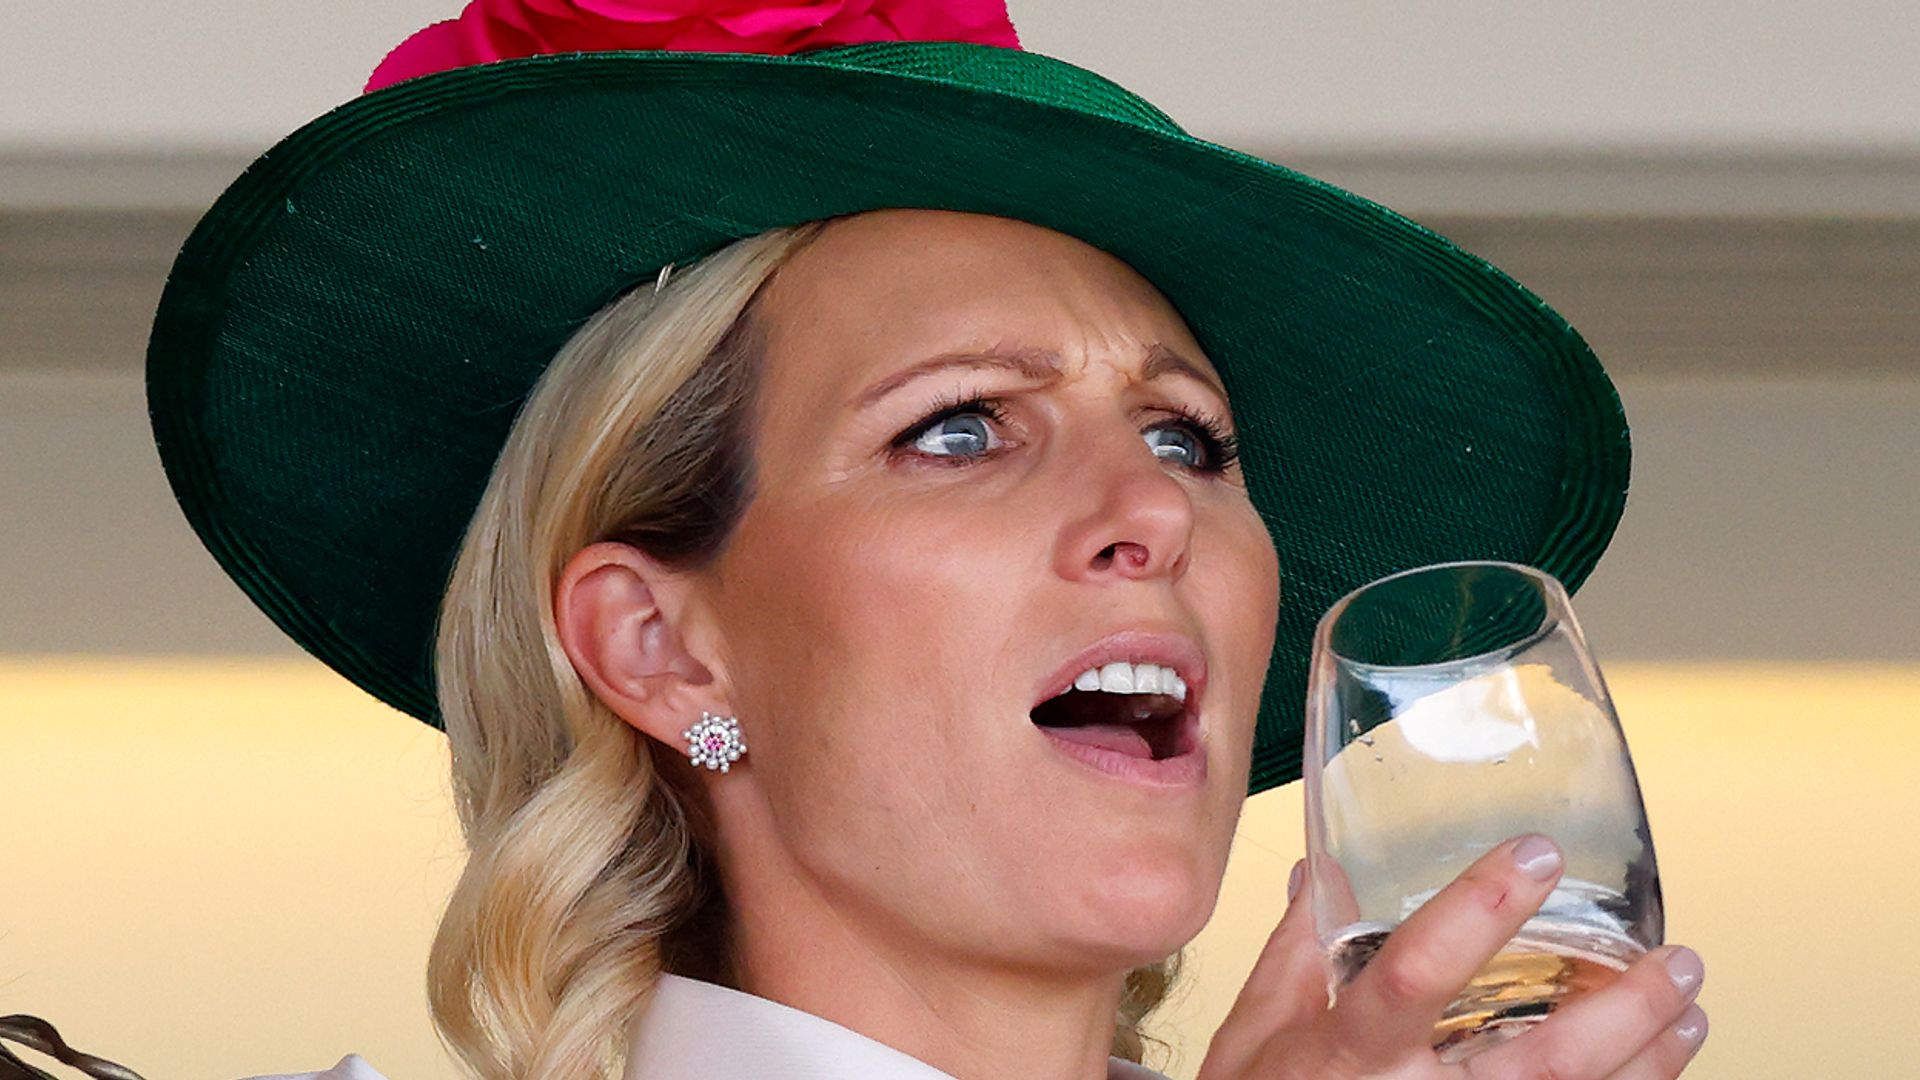 Zara Tindall with drink in hand at royal ascot